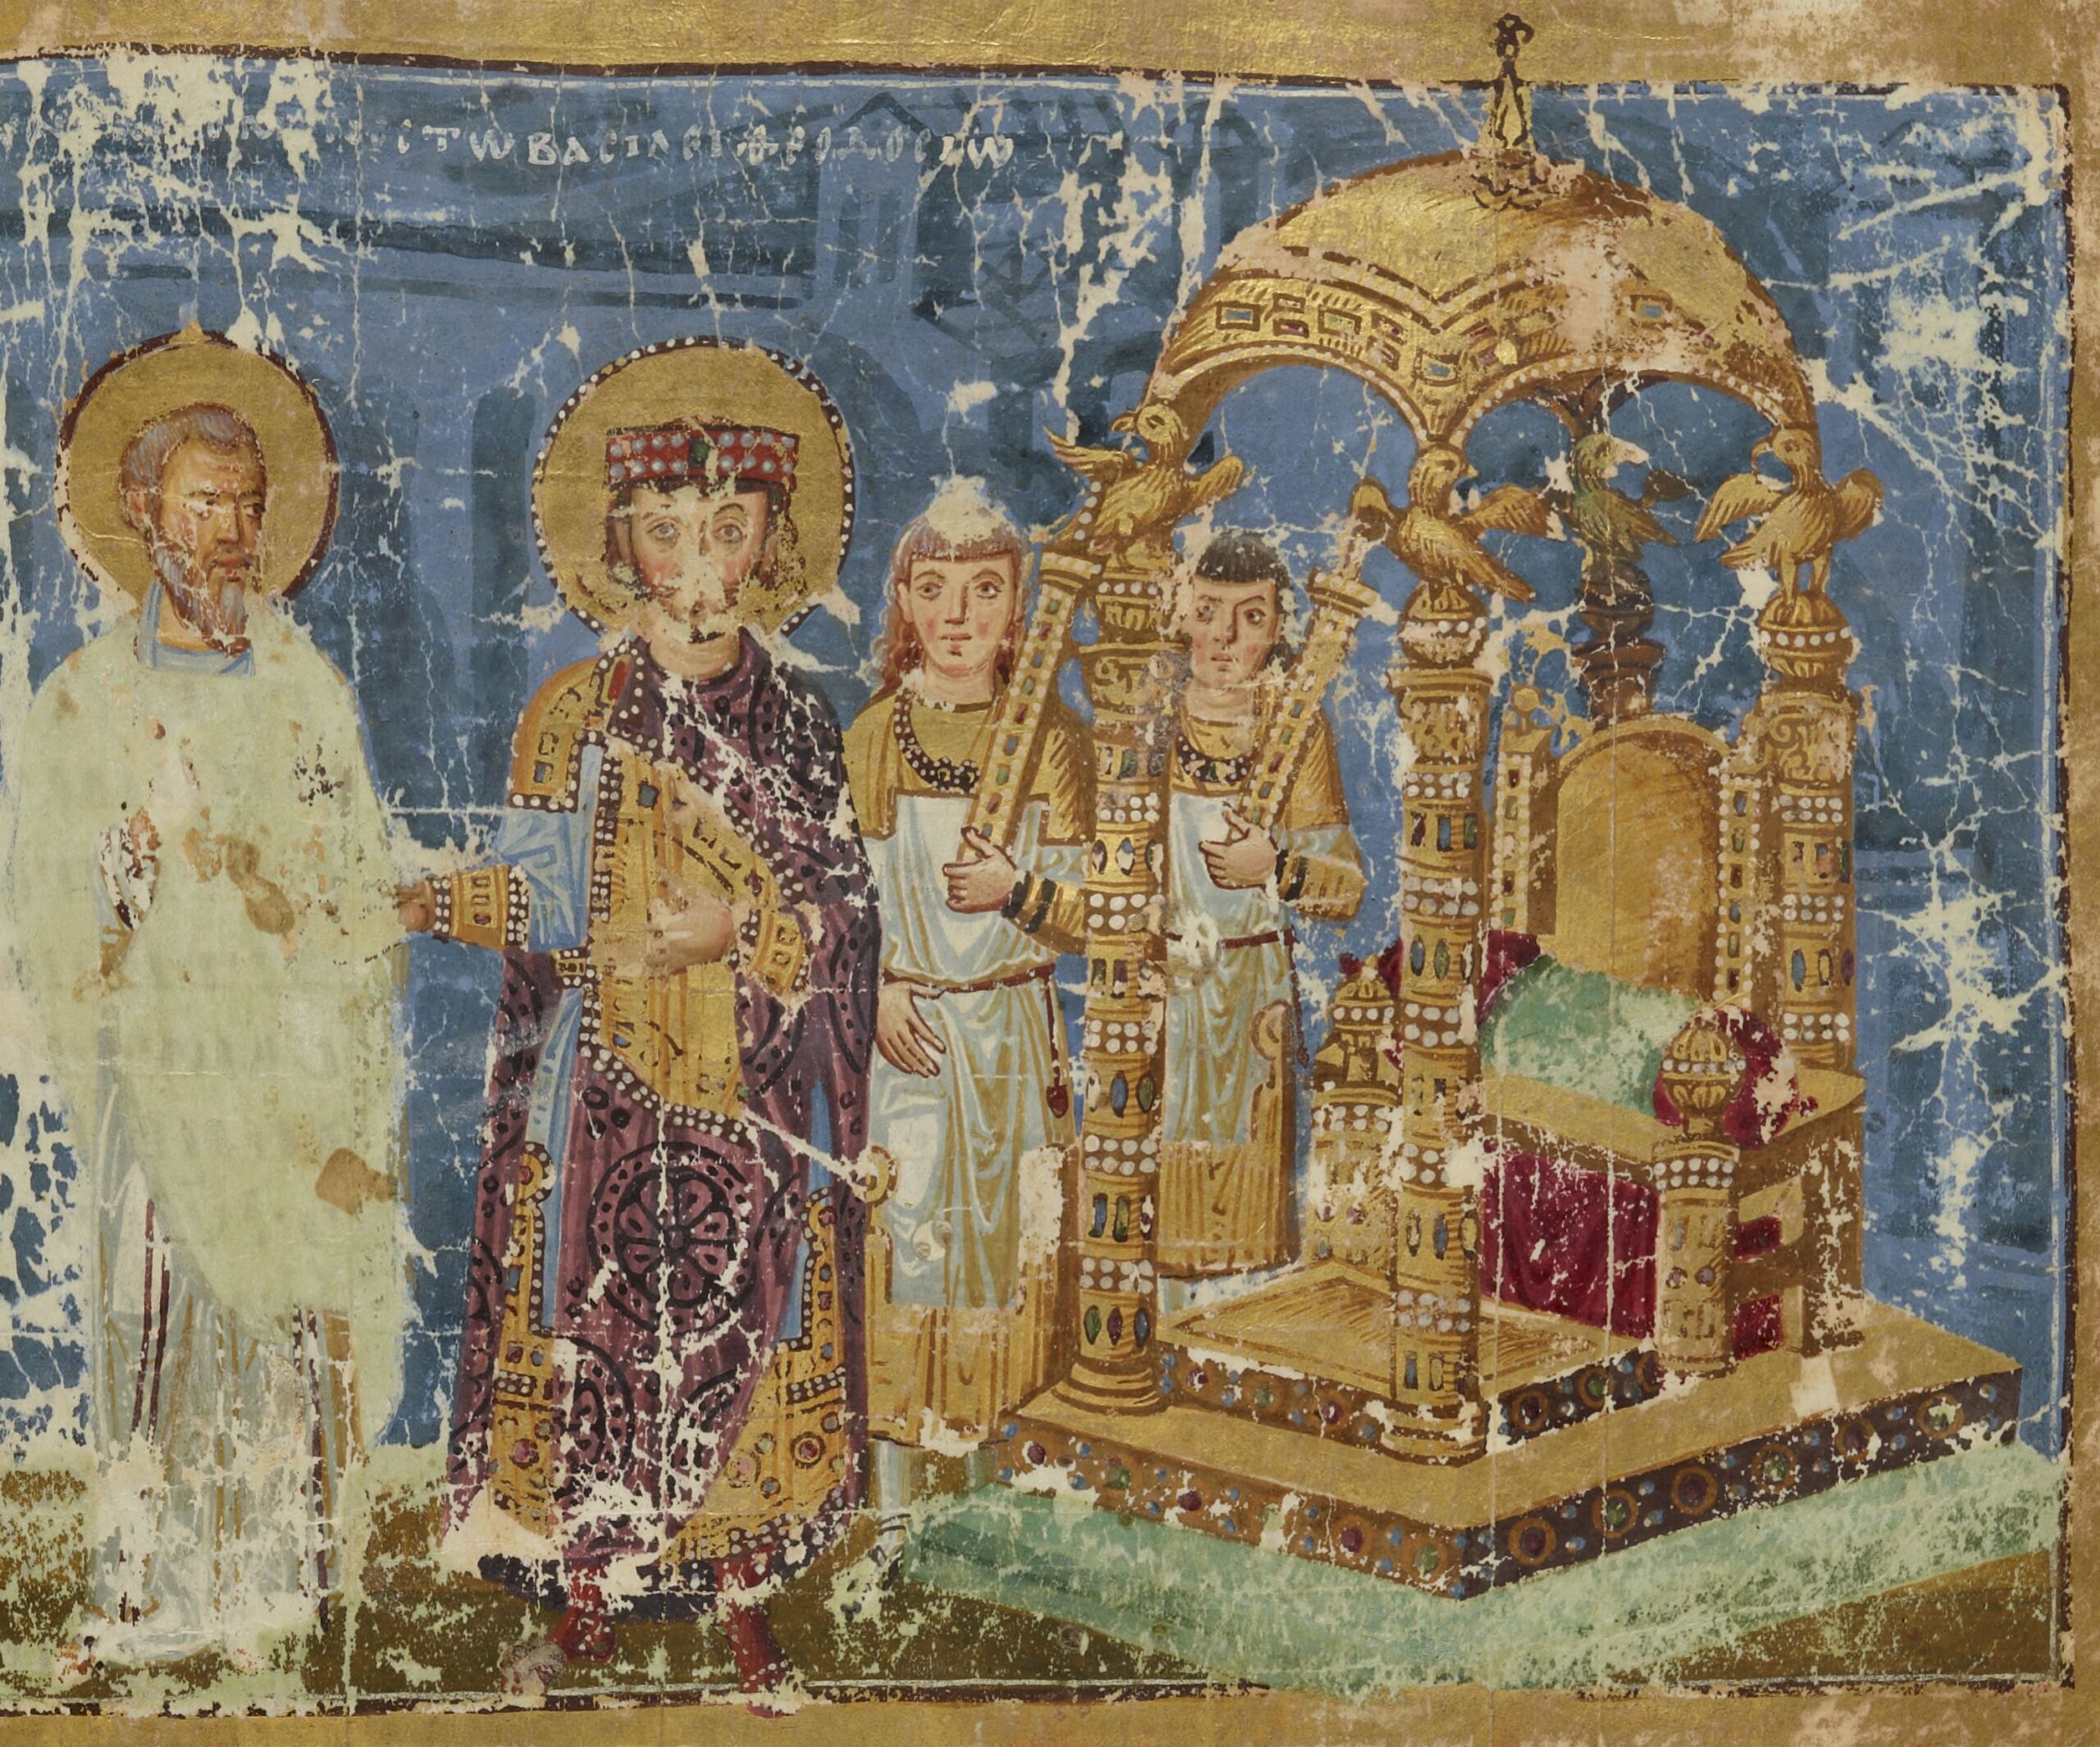 The saint and bishop of Constantinople, Gregory of Nazianzus, addresses the emperor and saint Theodosius the Great, who stands beside his jewelled throne enclosed in a ciborium, attended by palace guards. Both worthies' heads are nimbate.